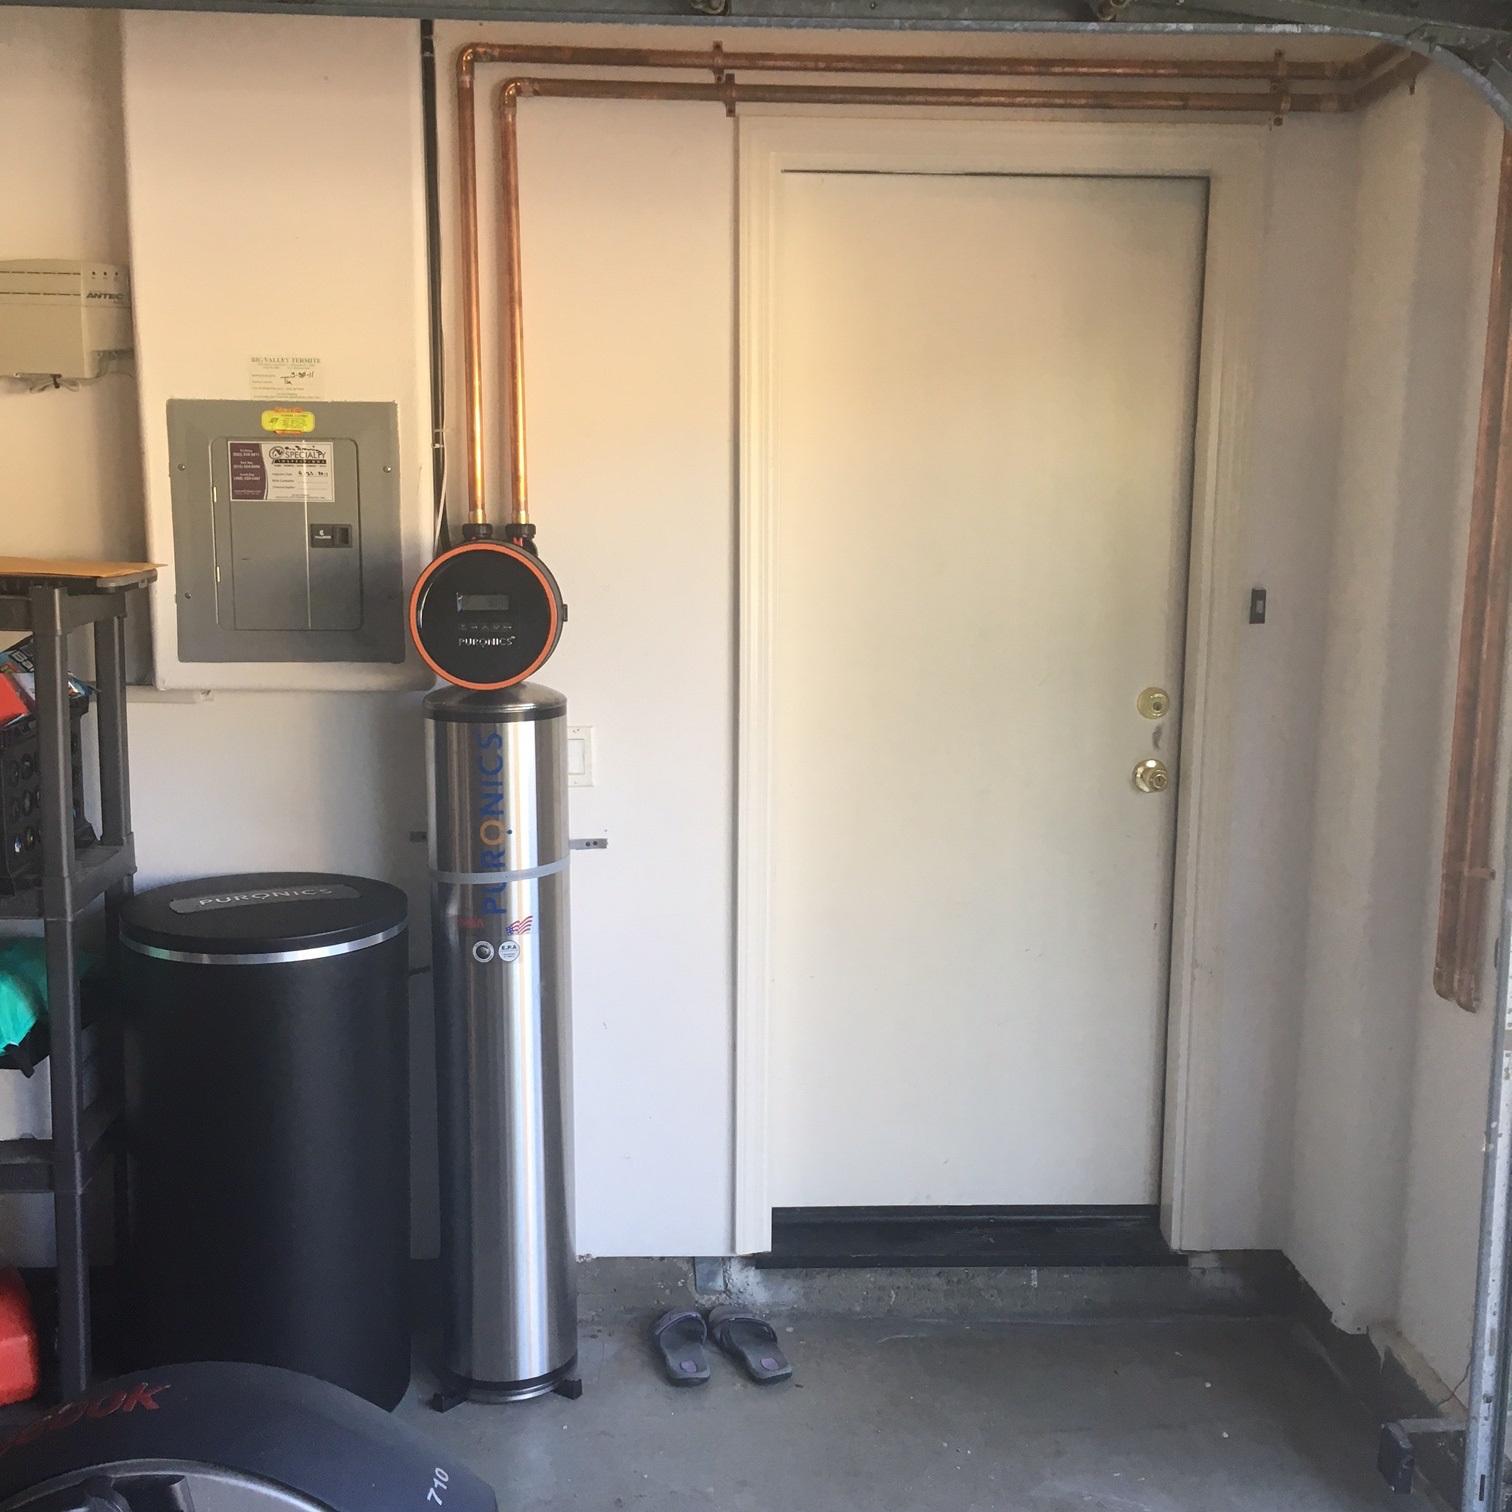 Picture of This Terminator® water treatment system is designed to remove the taste and odor of chlorine inhibit the growth of bacteria and remove water hardness throughout the entire house. - Puronics, LLC